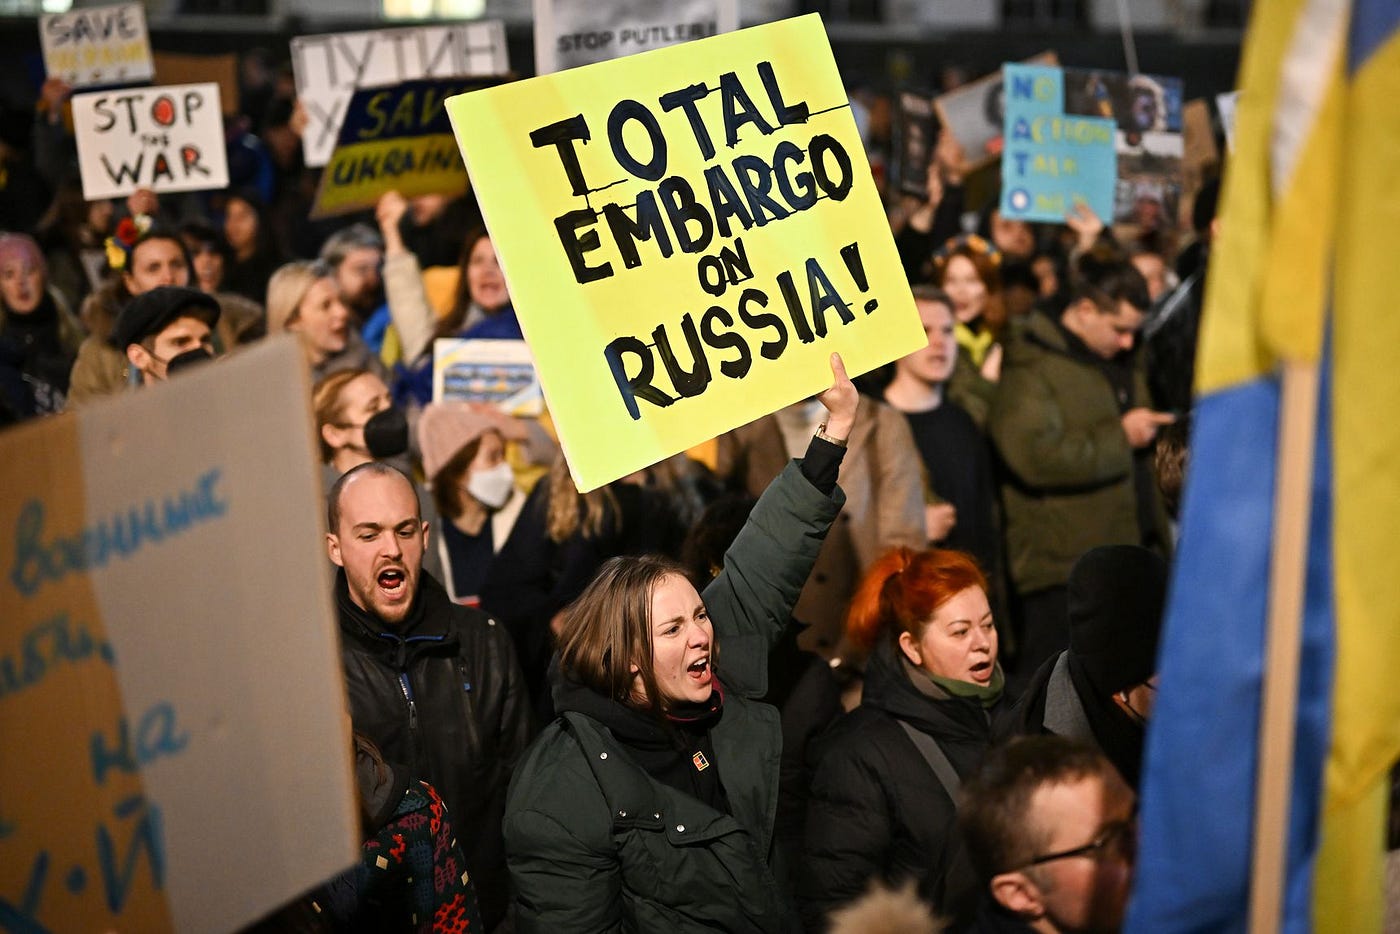 People demonstrate in support of Ukraine outside the residence of UK Prime Minister Boris Johnson in London on February 25. Jeff J Mitchell/Getty Images